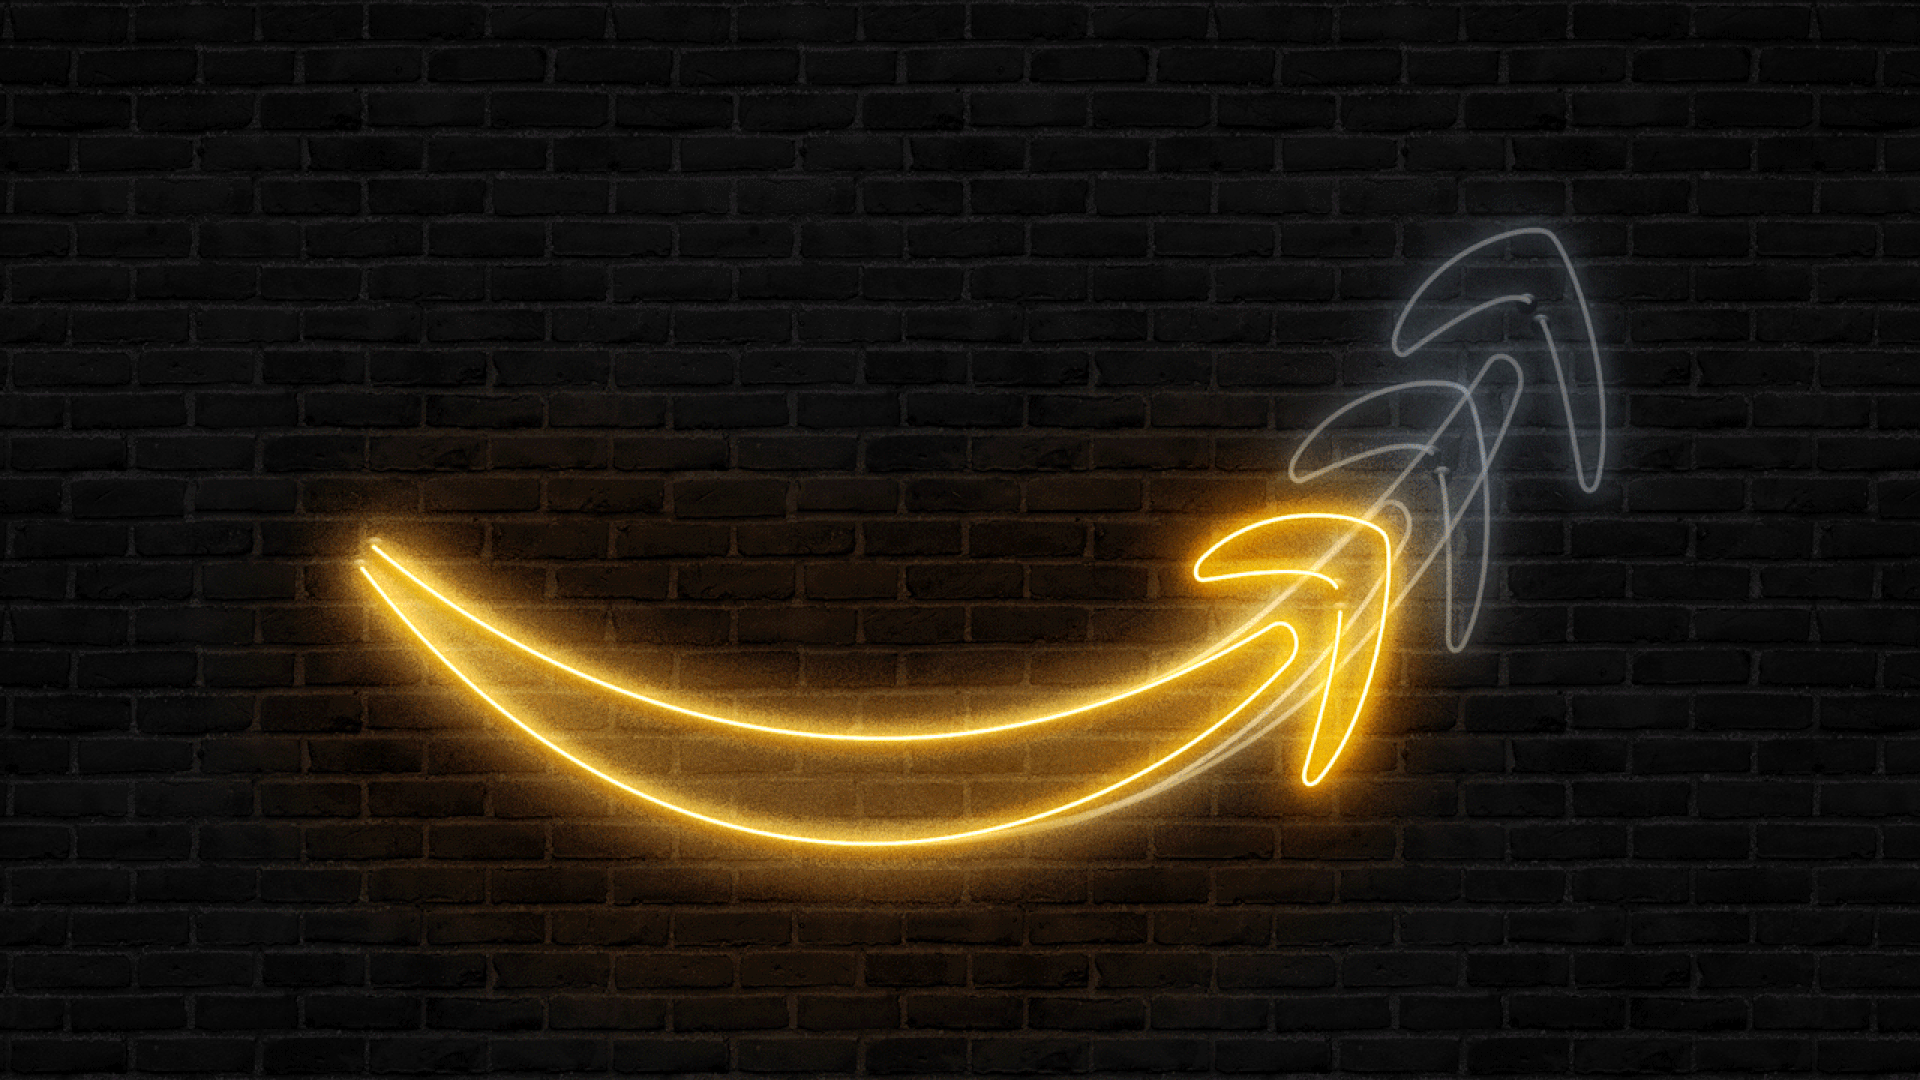 Animated illustration of a neon sign with the Amazon smile growing larger.